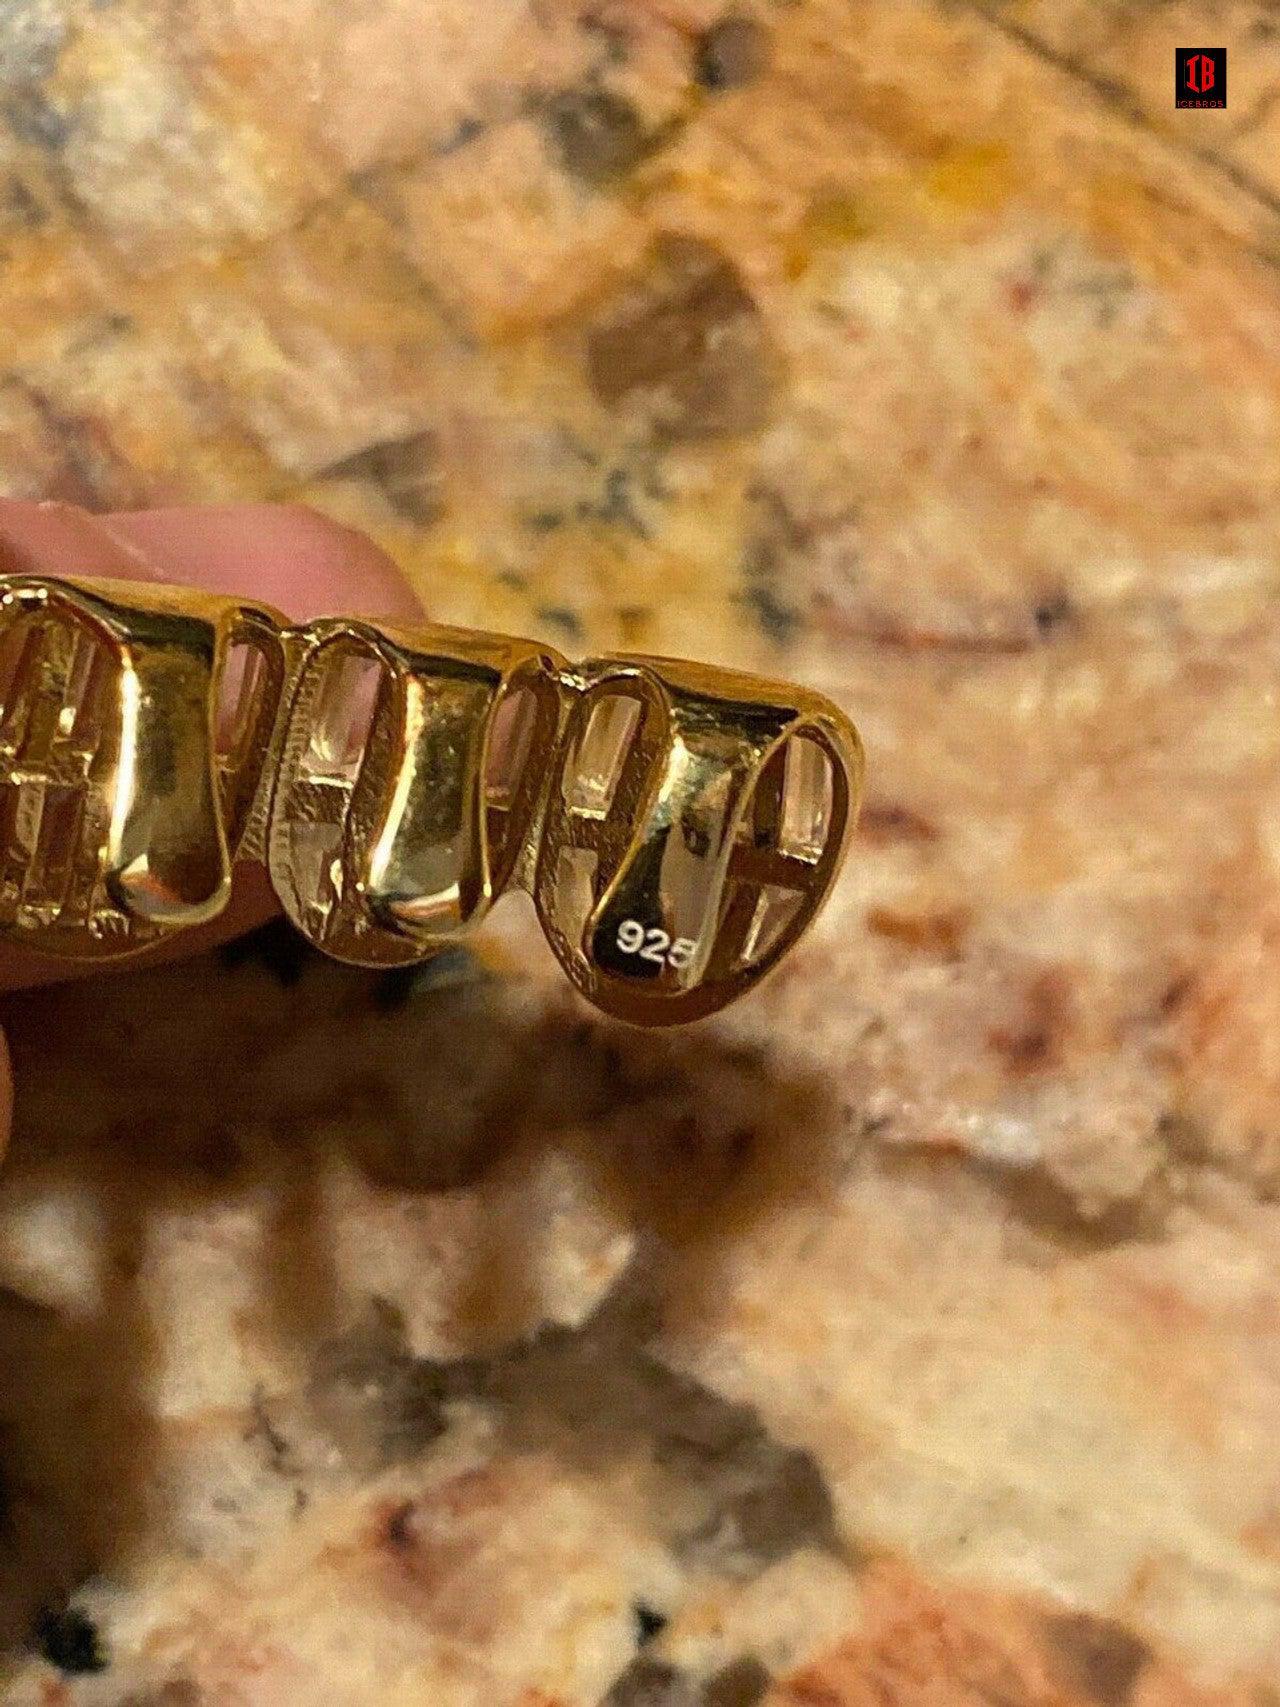 Gold Rhodium 925 Sterling Silver Grillz Baguette Iced Grills Top Or Bottom Teeth